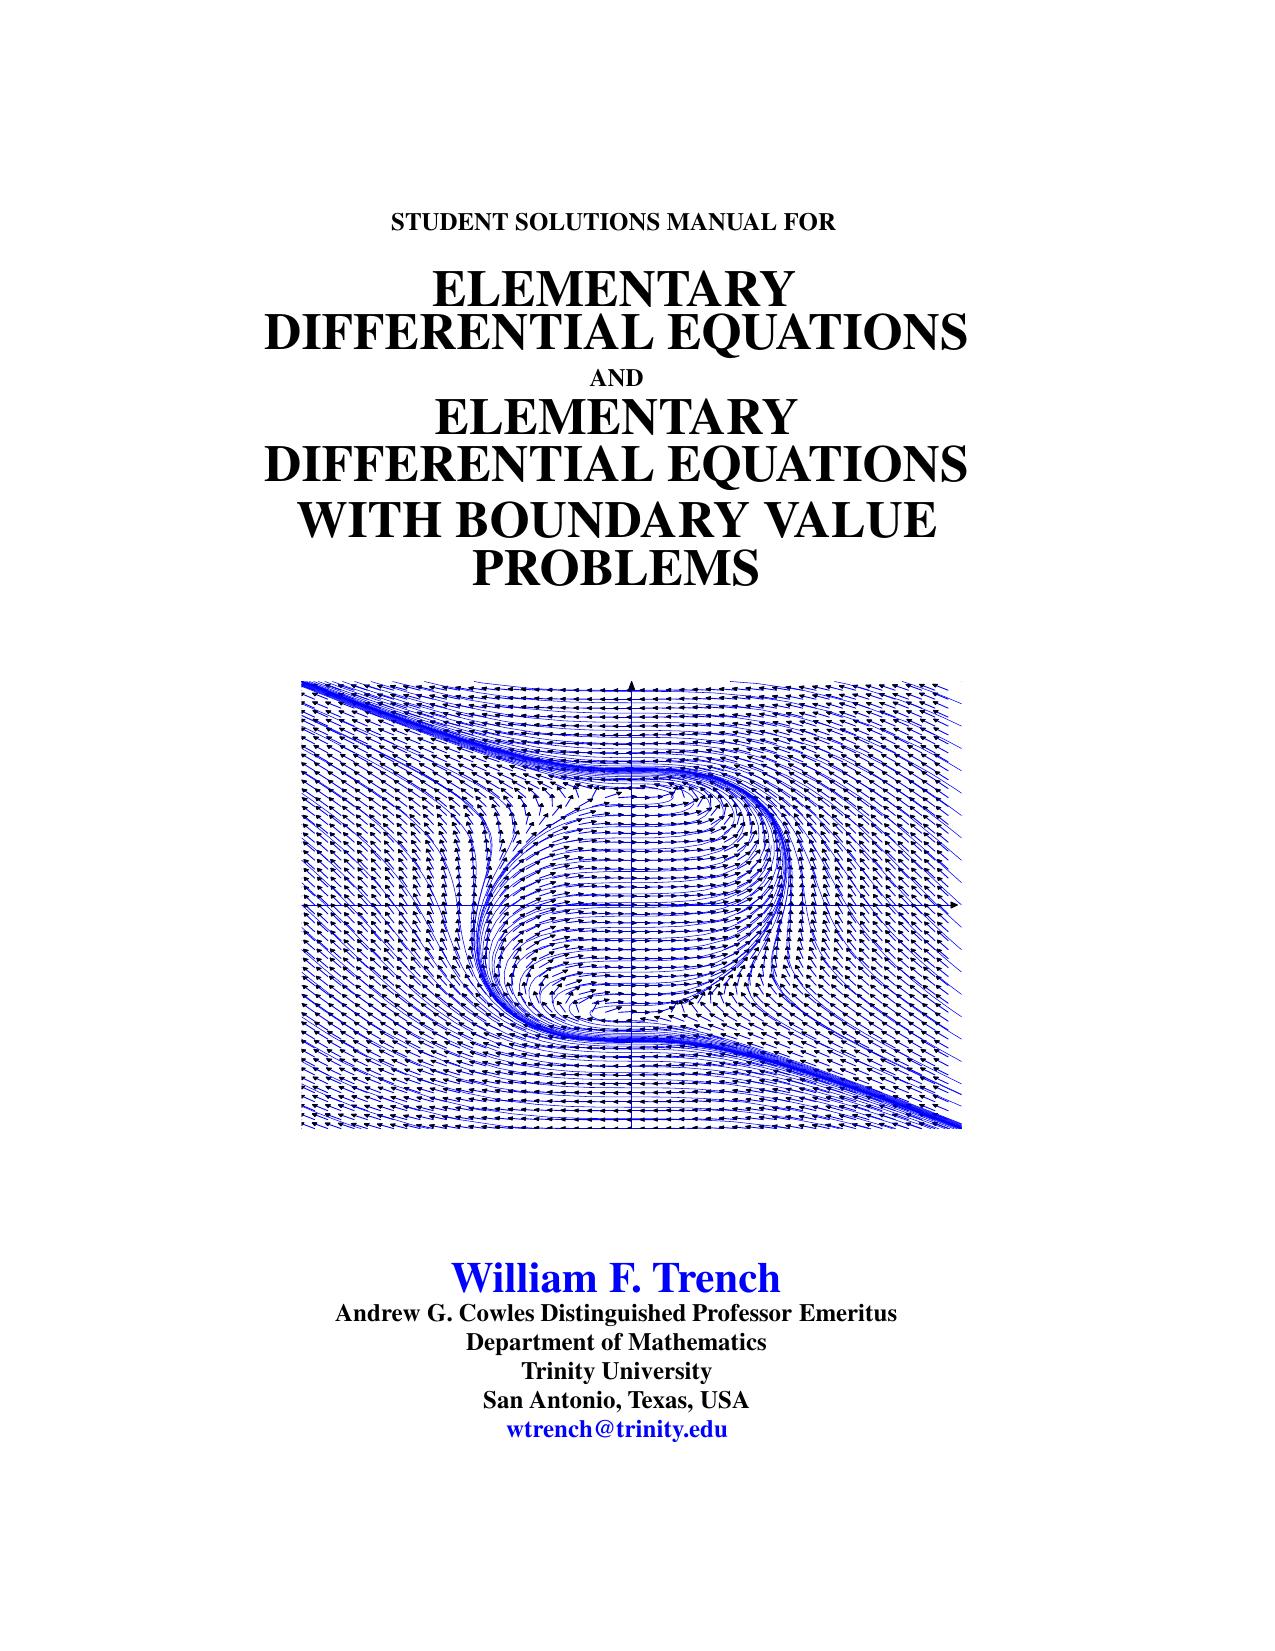 Student Solutions Manual for Elementary Differential Equations and Elementary Differential Equations with Boundary Value Problems